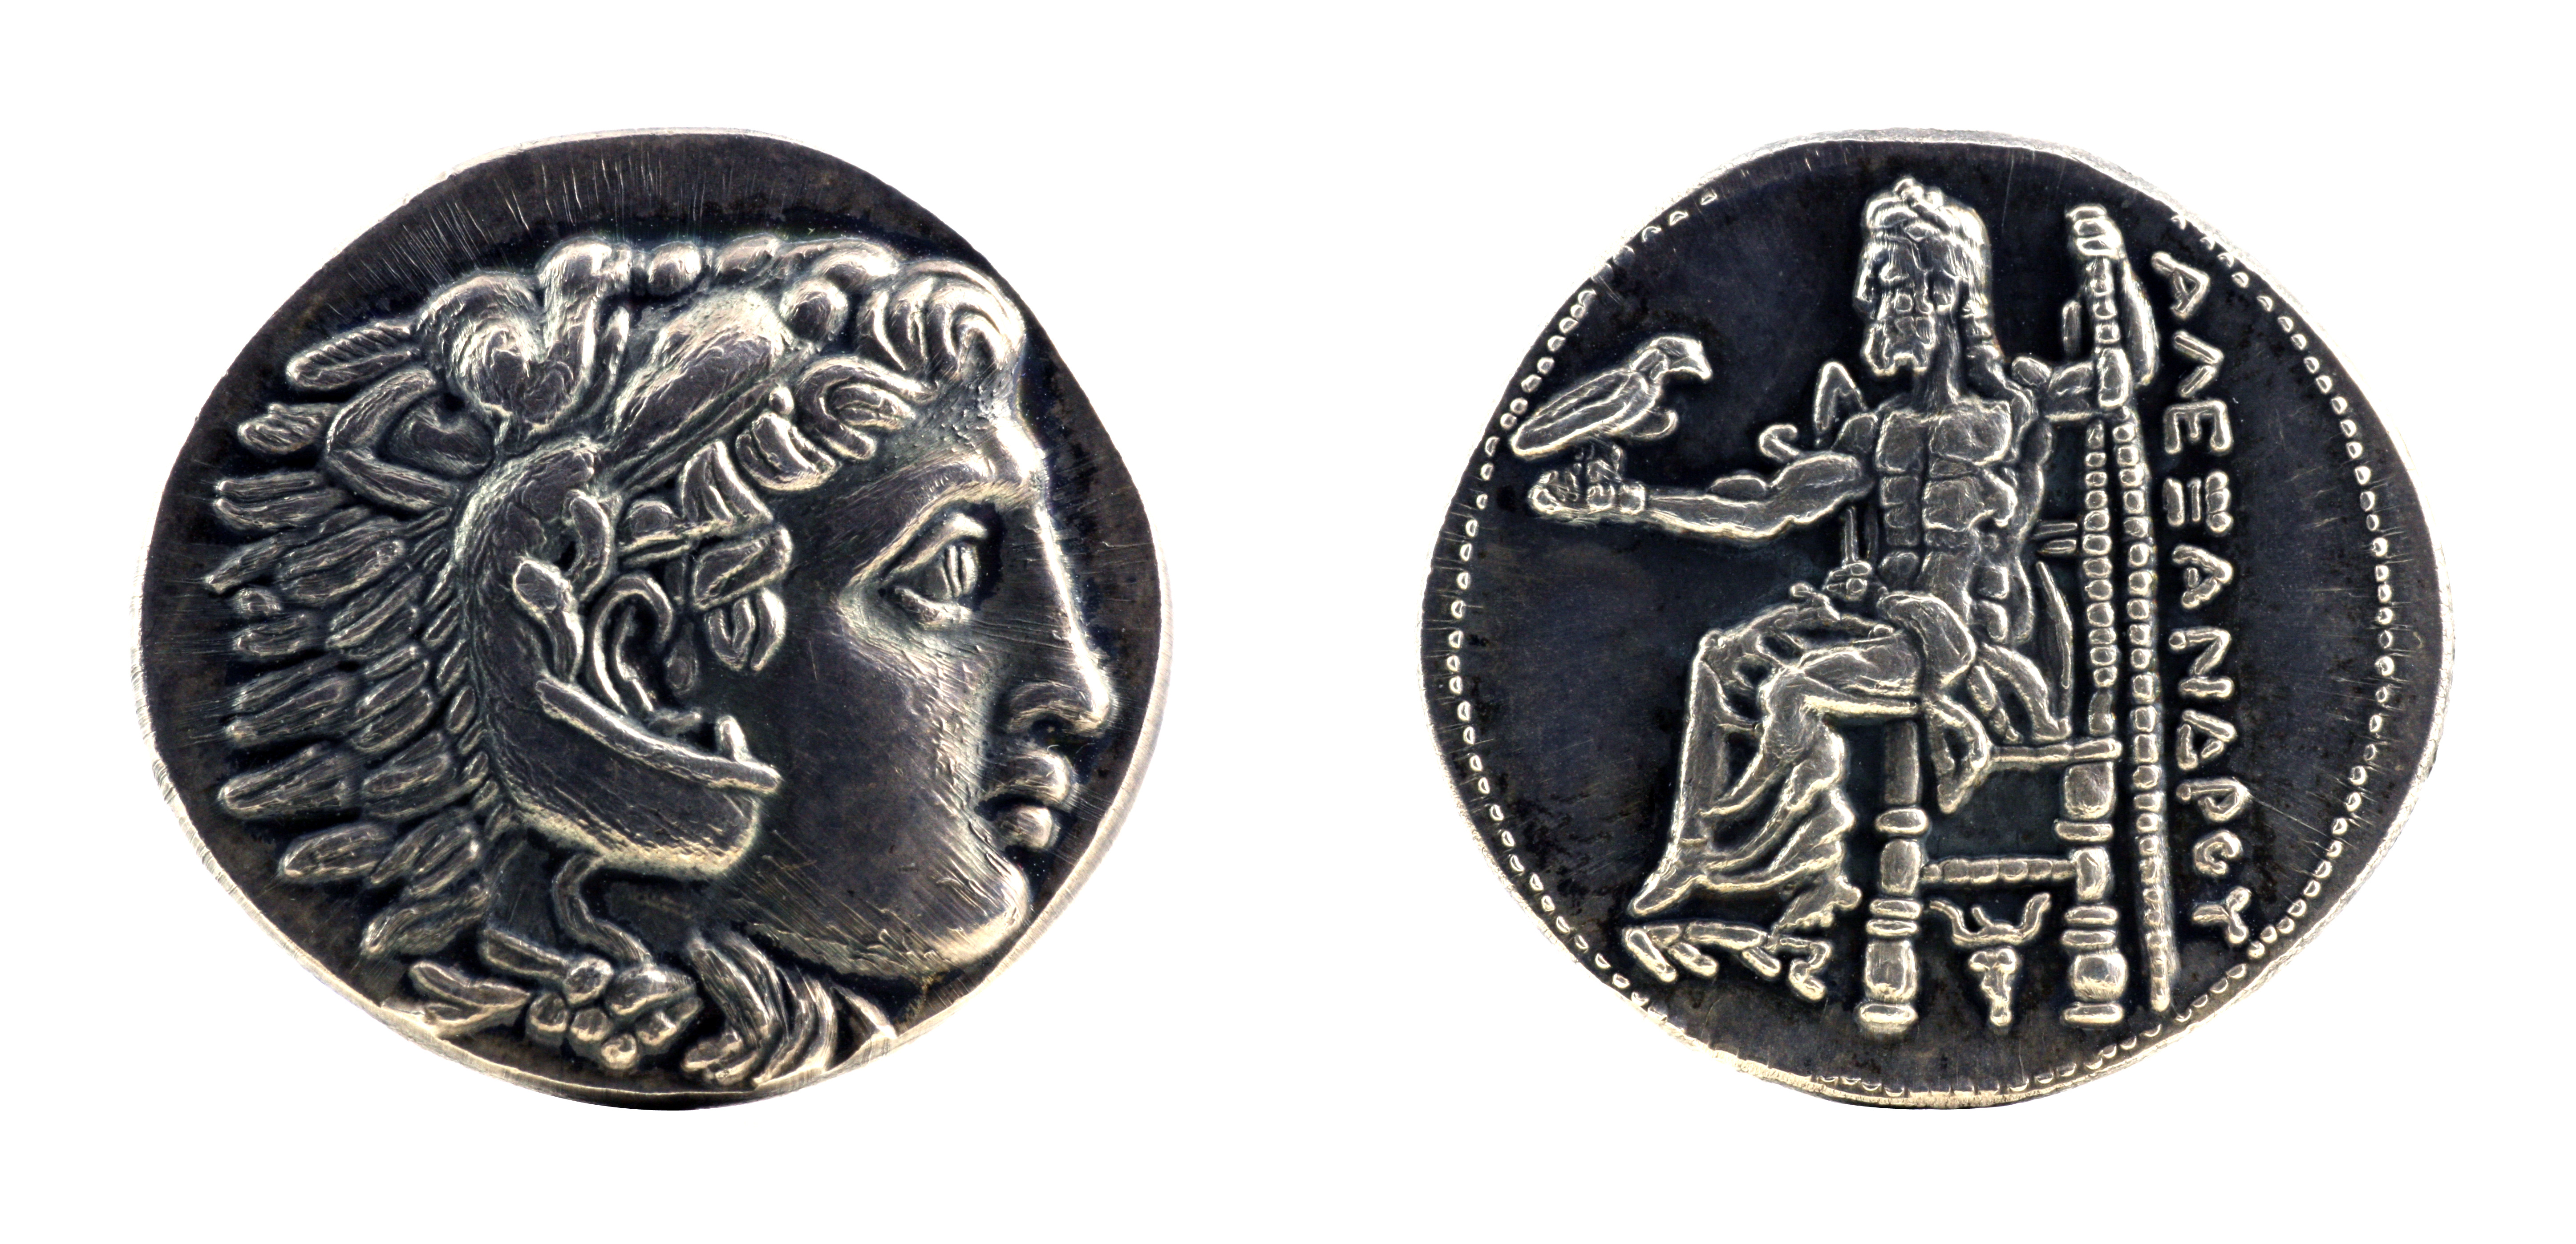 What does that tetradrachm from Alexander the Great representing pay for two days of a skilled construction worker represent today? Image courtesy Adobe Stock.